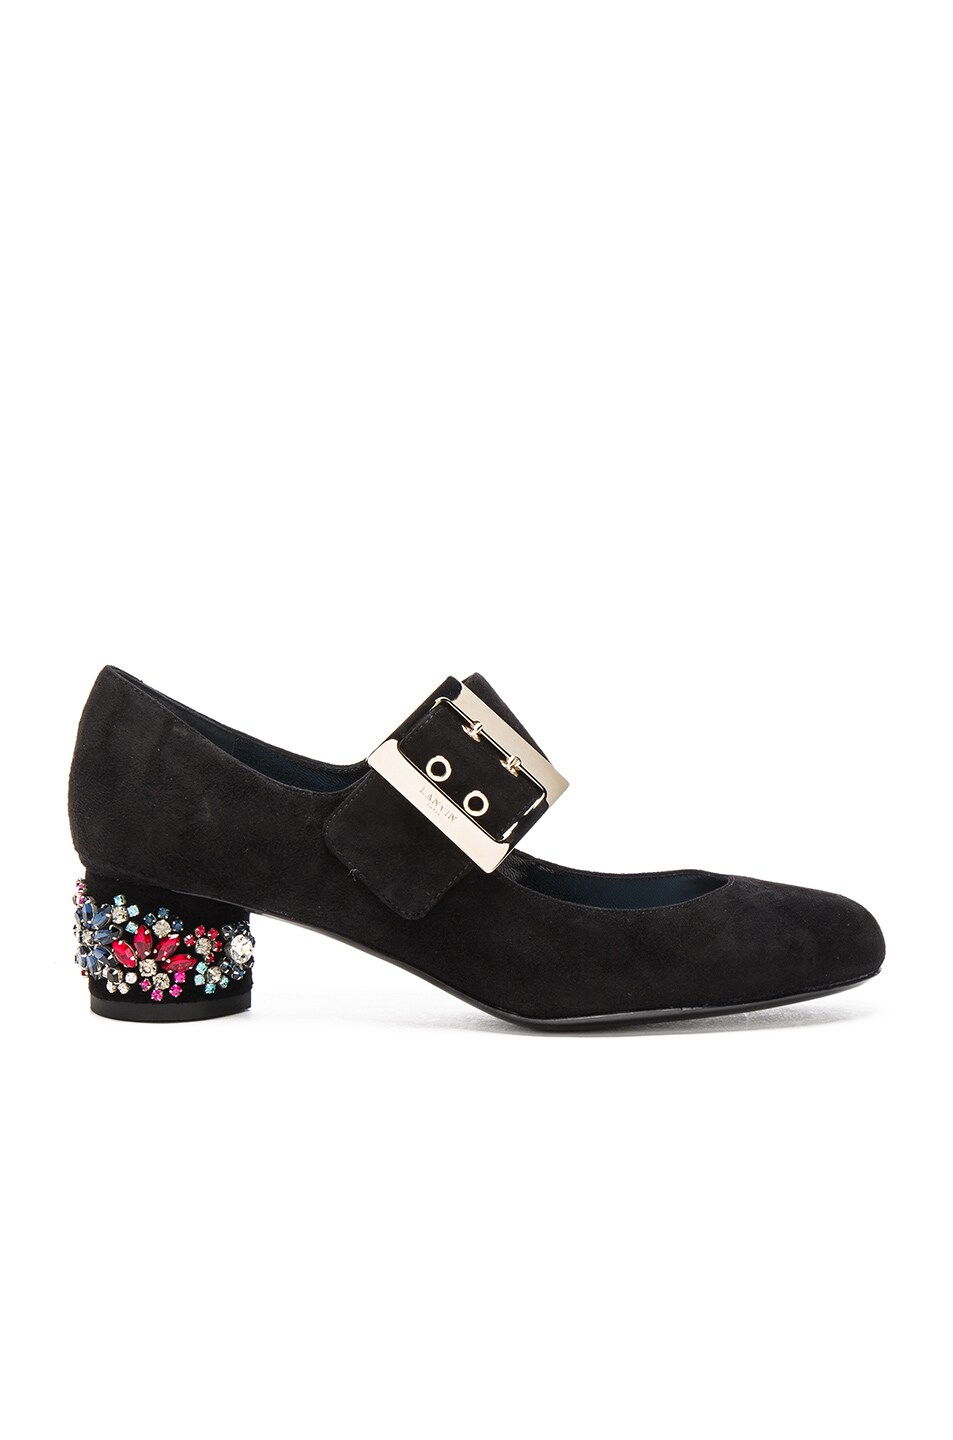 Image 1 of Lanvin Embroidered Suede Mary Jane Pumps in Black & Multi